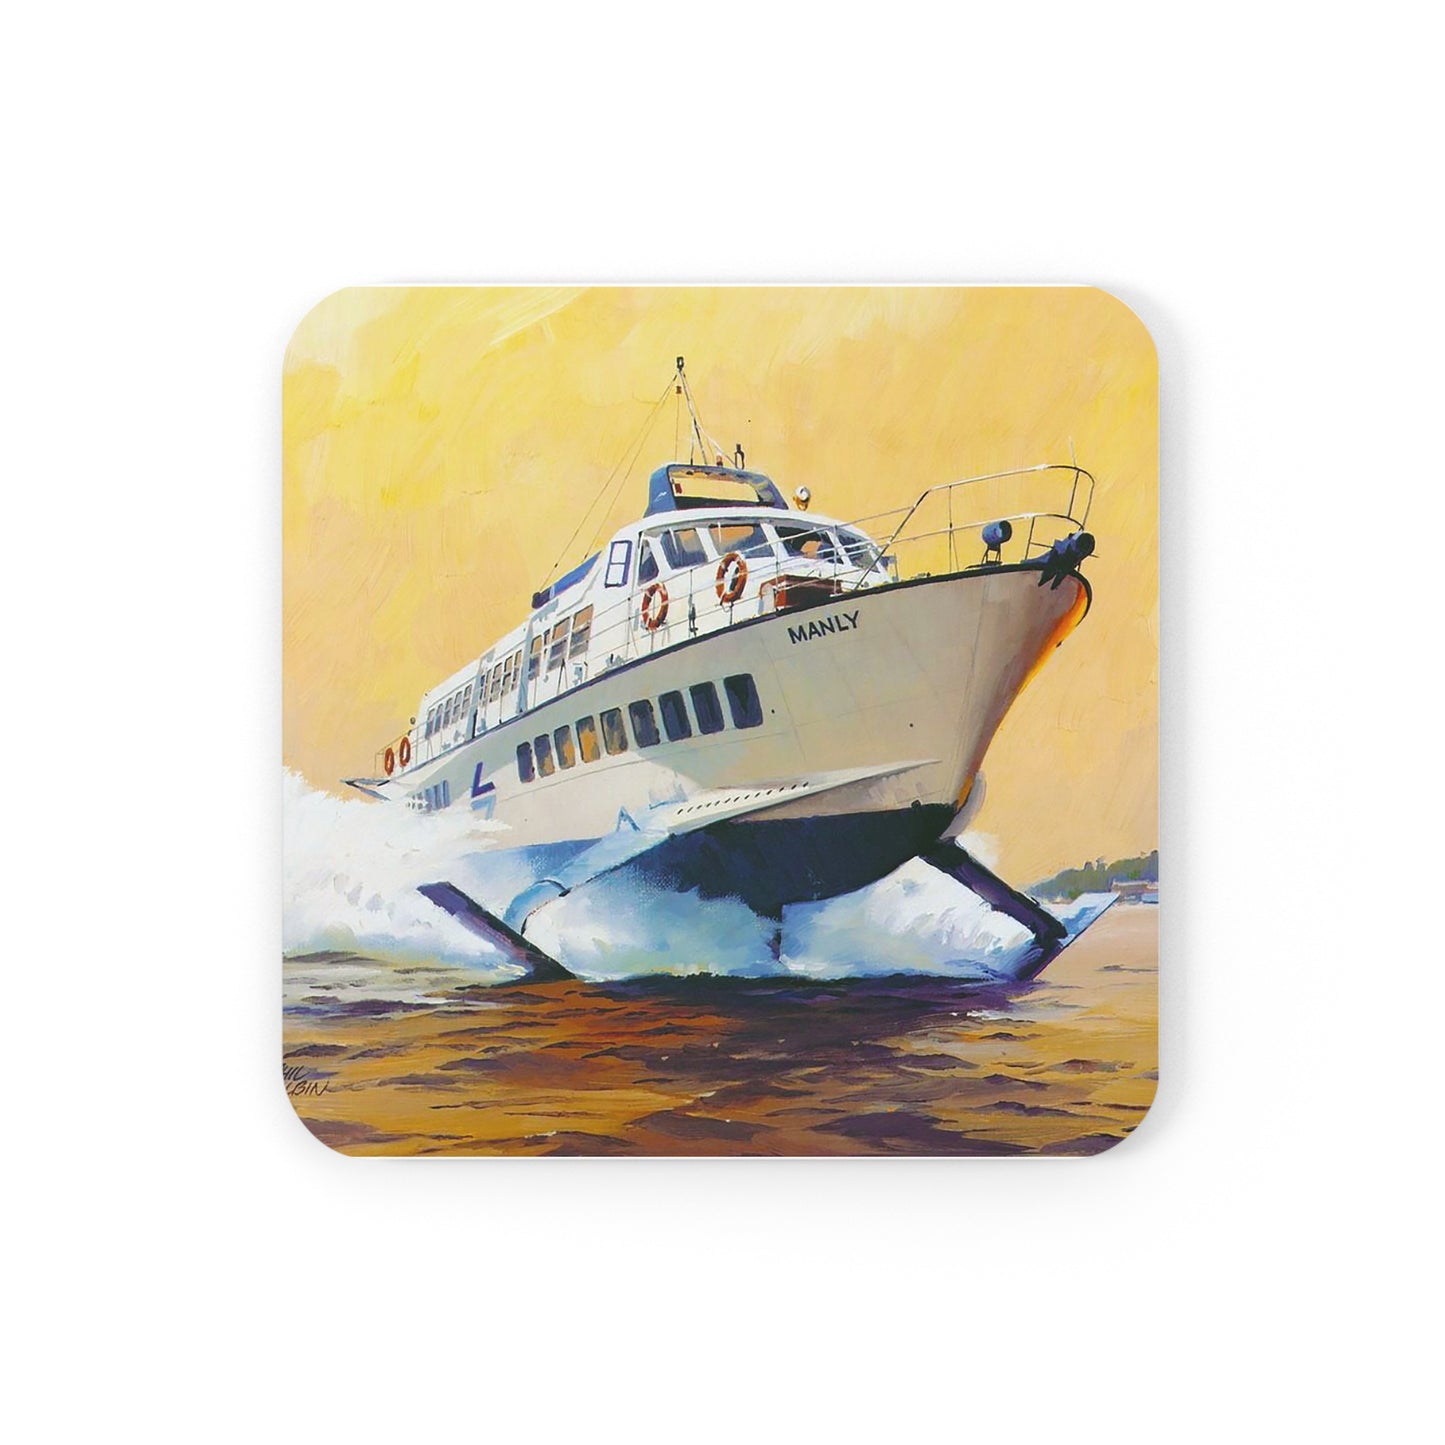 Corkwood Coaster Set customised with painting by Phil Belbin "Manly" Hydrofoil